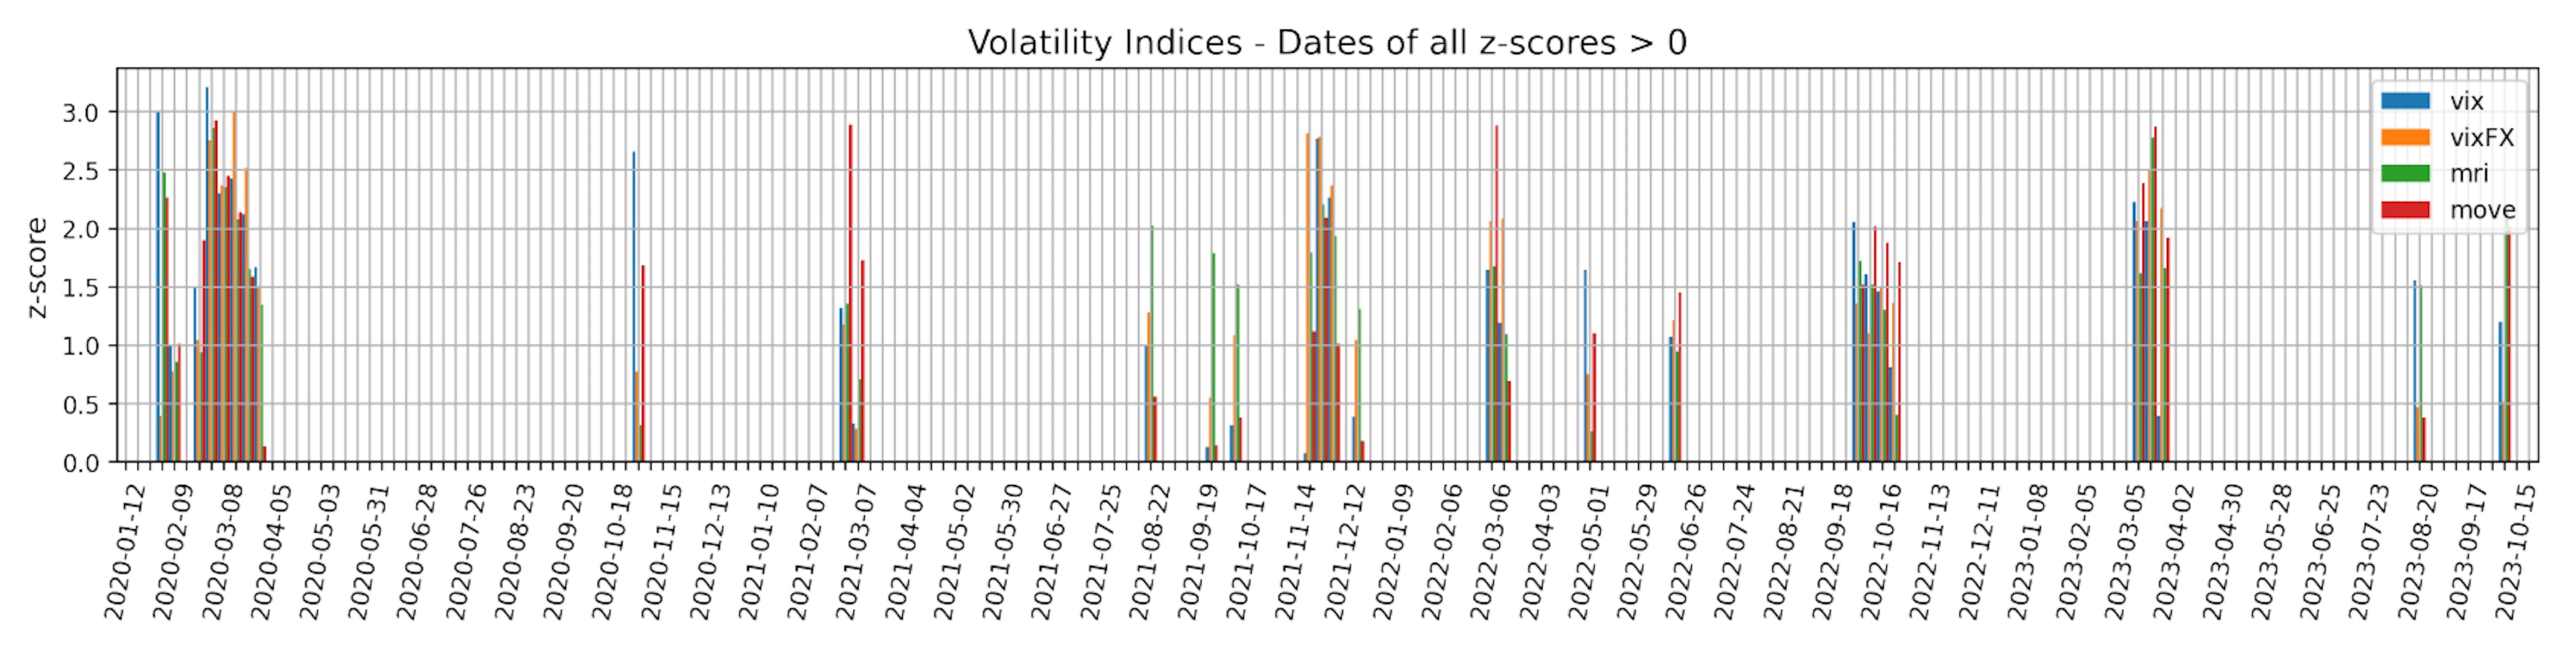 Figure 1: Weeks on which our volatility indices have all positive z-scores, with respect to a rolling window of length ∆T = 13 weeks. According to the strength of these z-scores, broad market dislocations can be consequently identified.